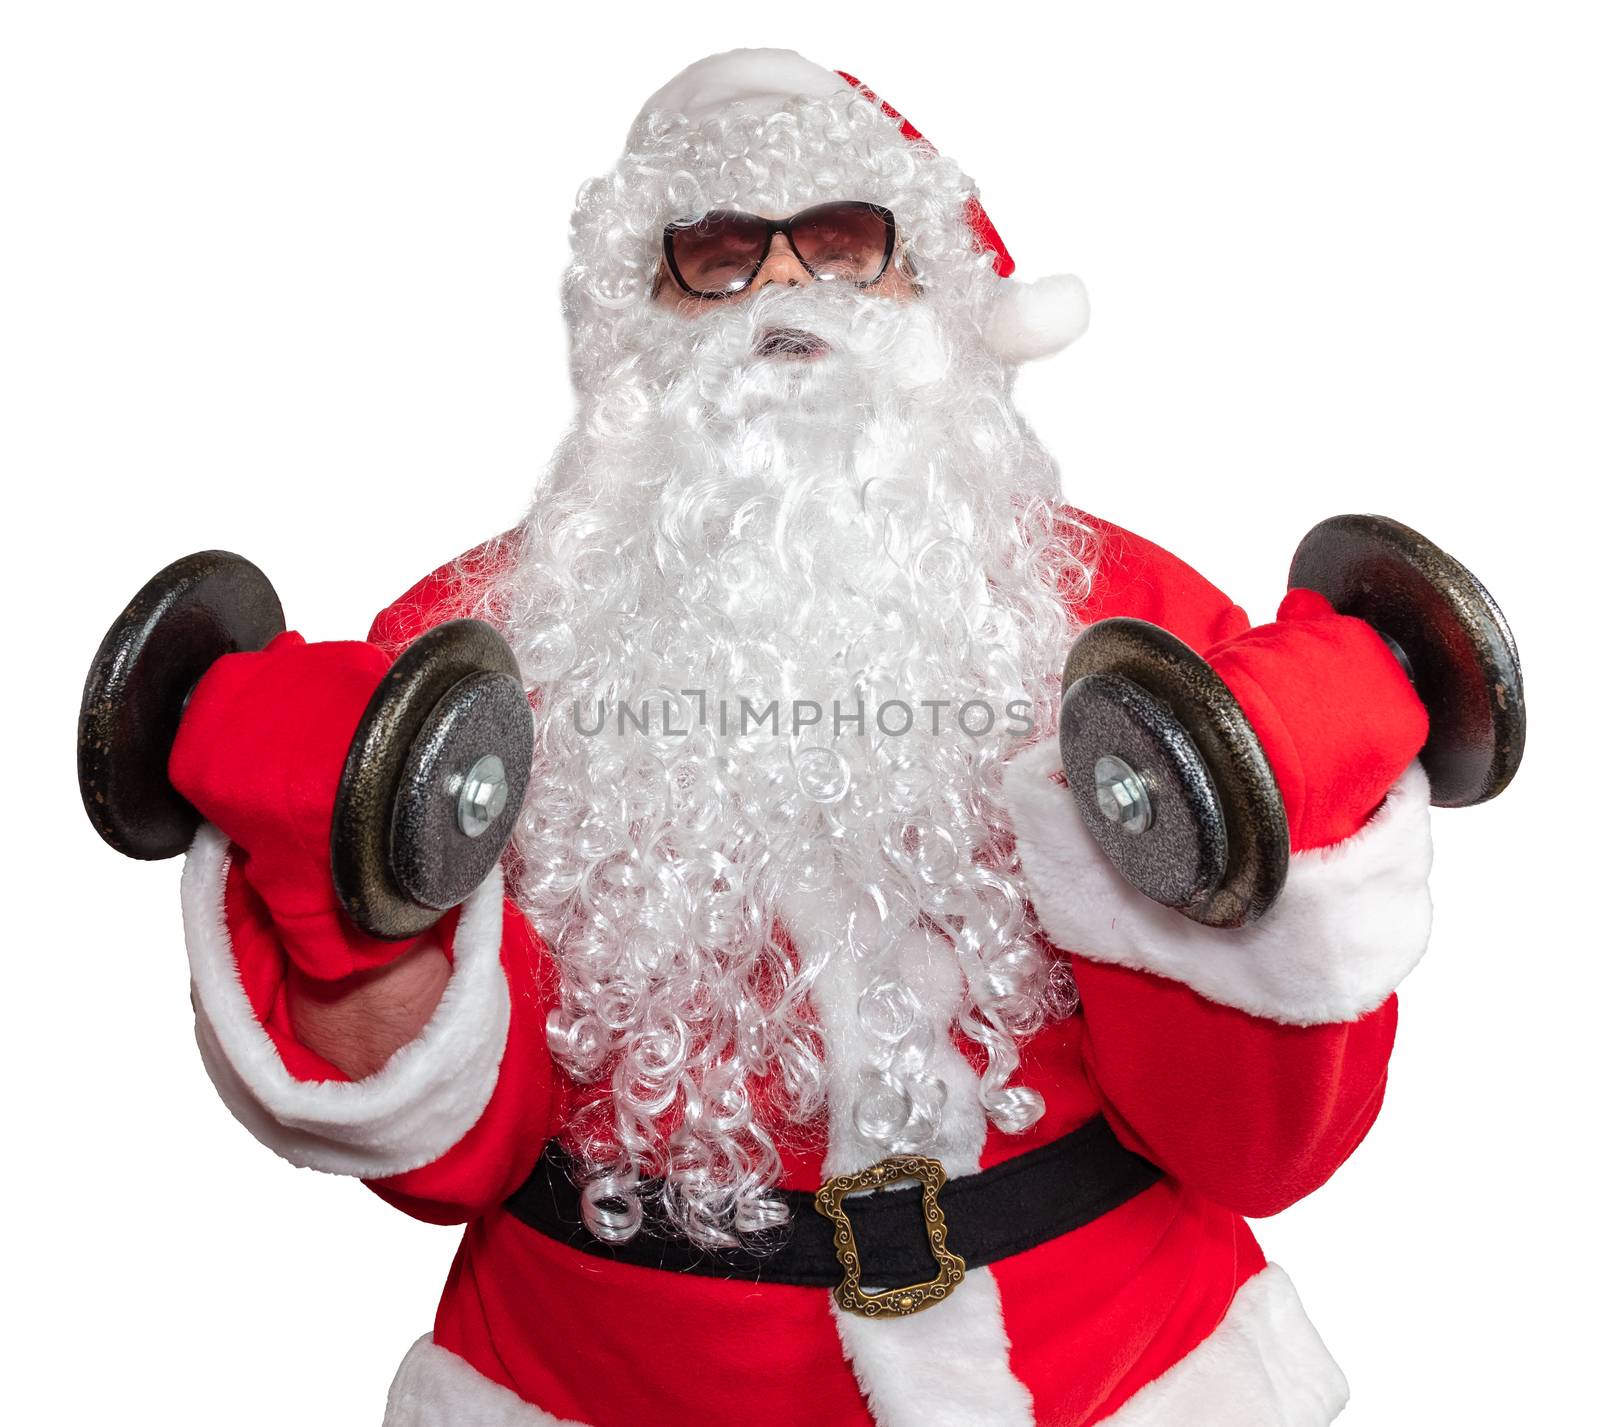 Santa Claus working out with two dumbbells and doing bicep curls. Santa is pushing it really hard. Santa wearing sunglasses and a long white beard. Isolated on white background by DamantisZ